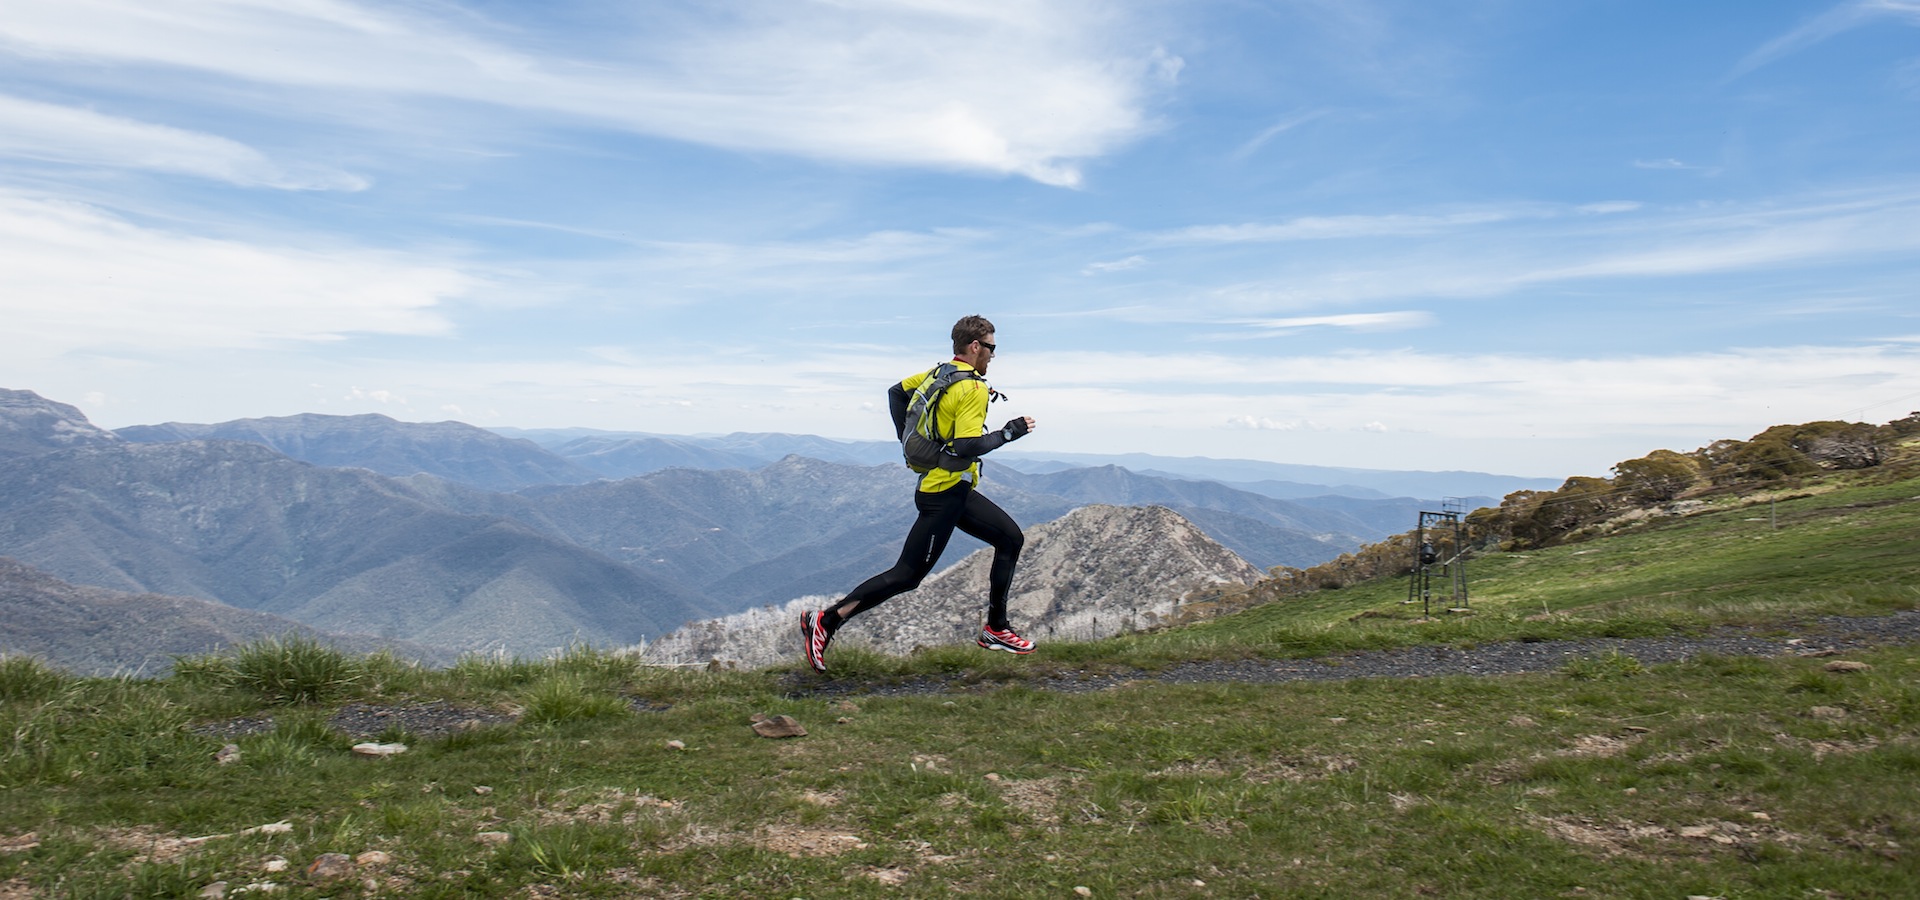 7 Peaks Run Trail running in Victoria's High Country